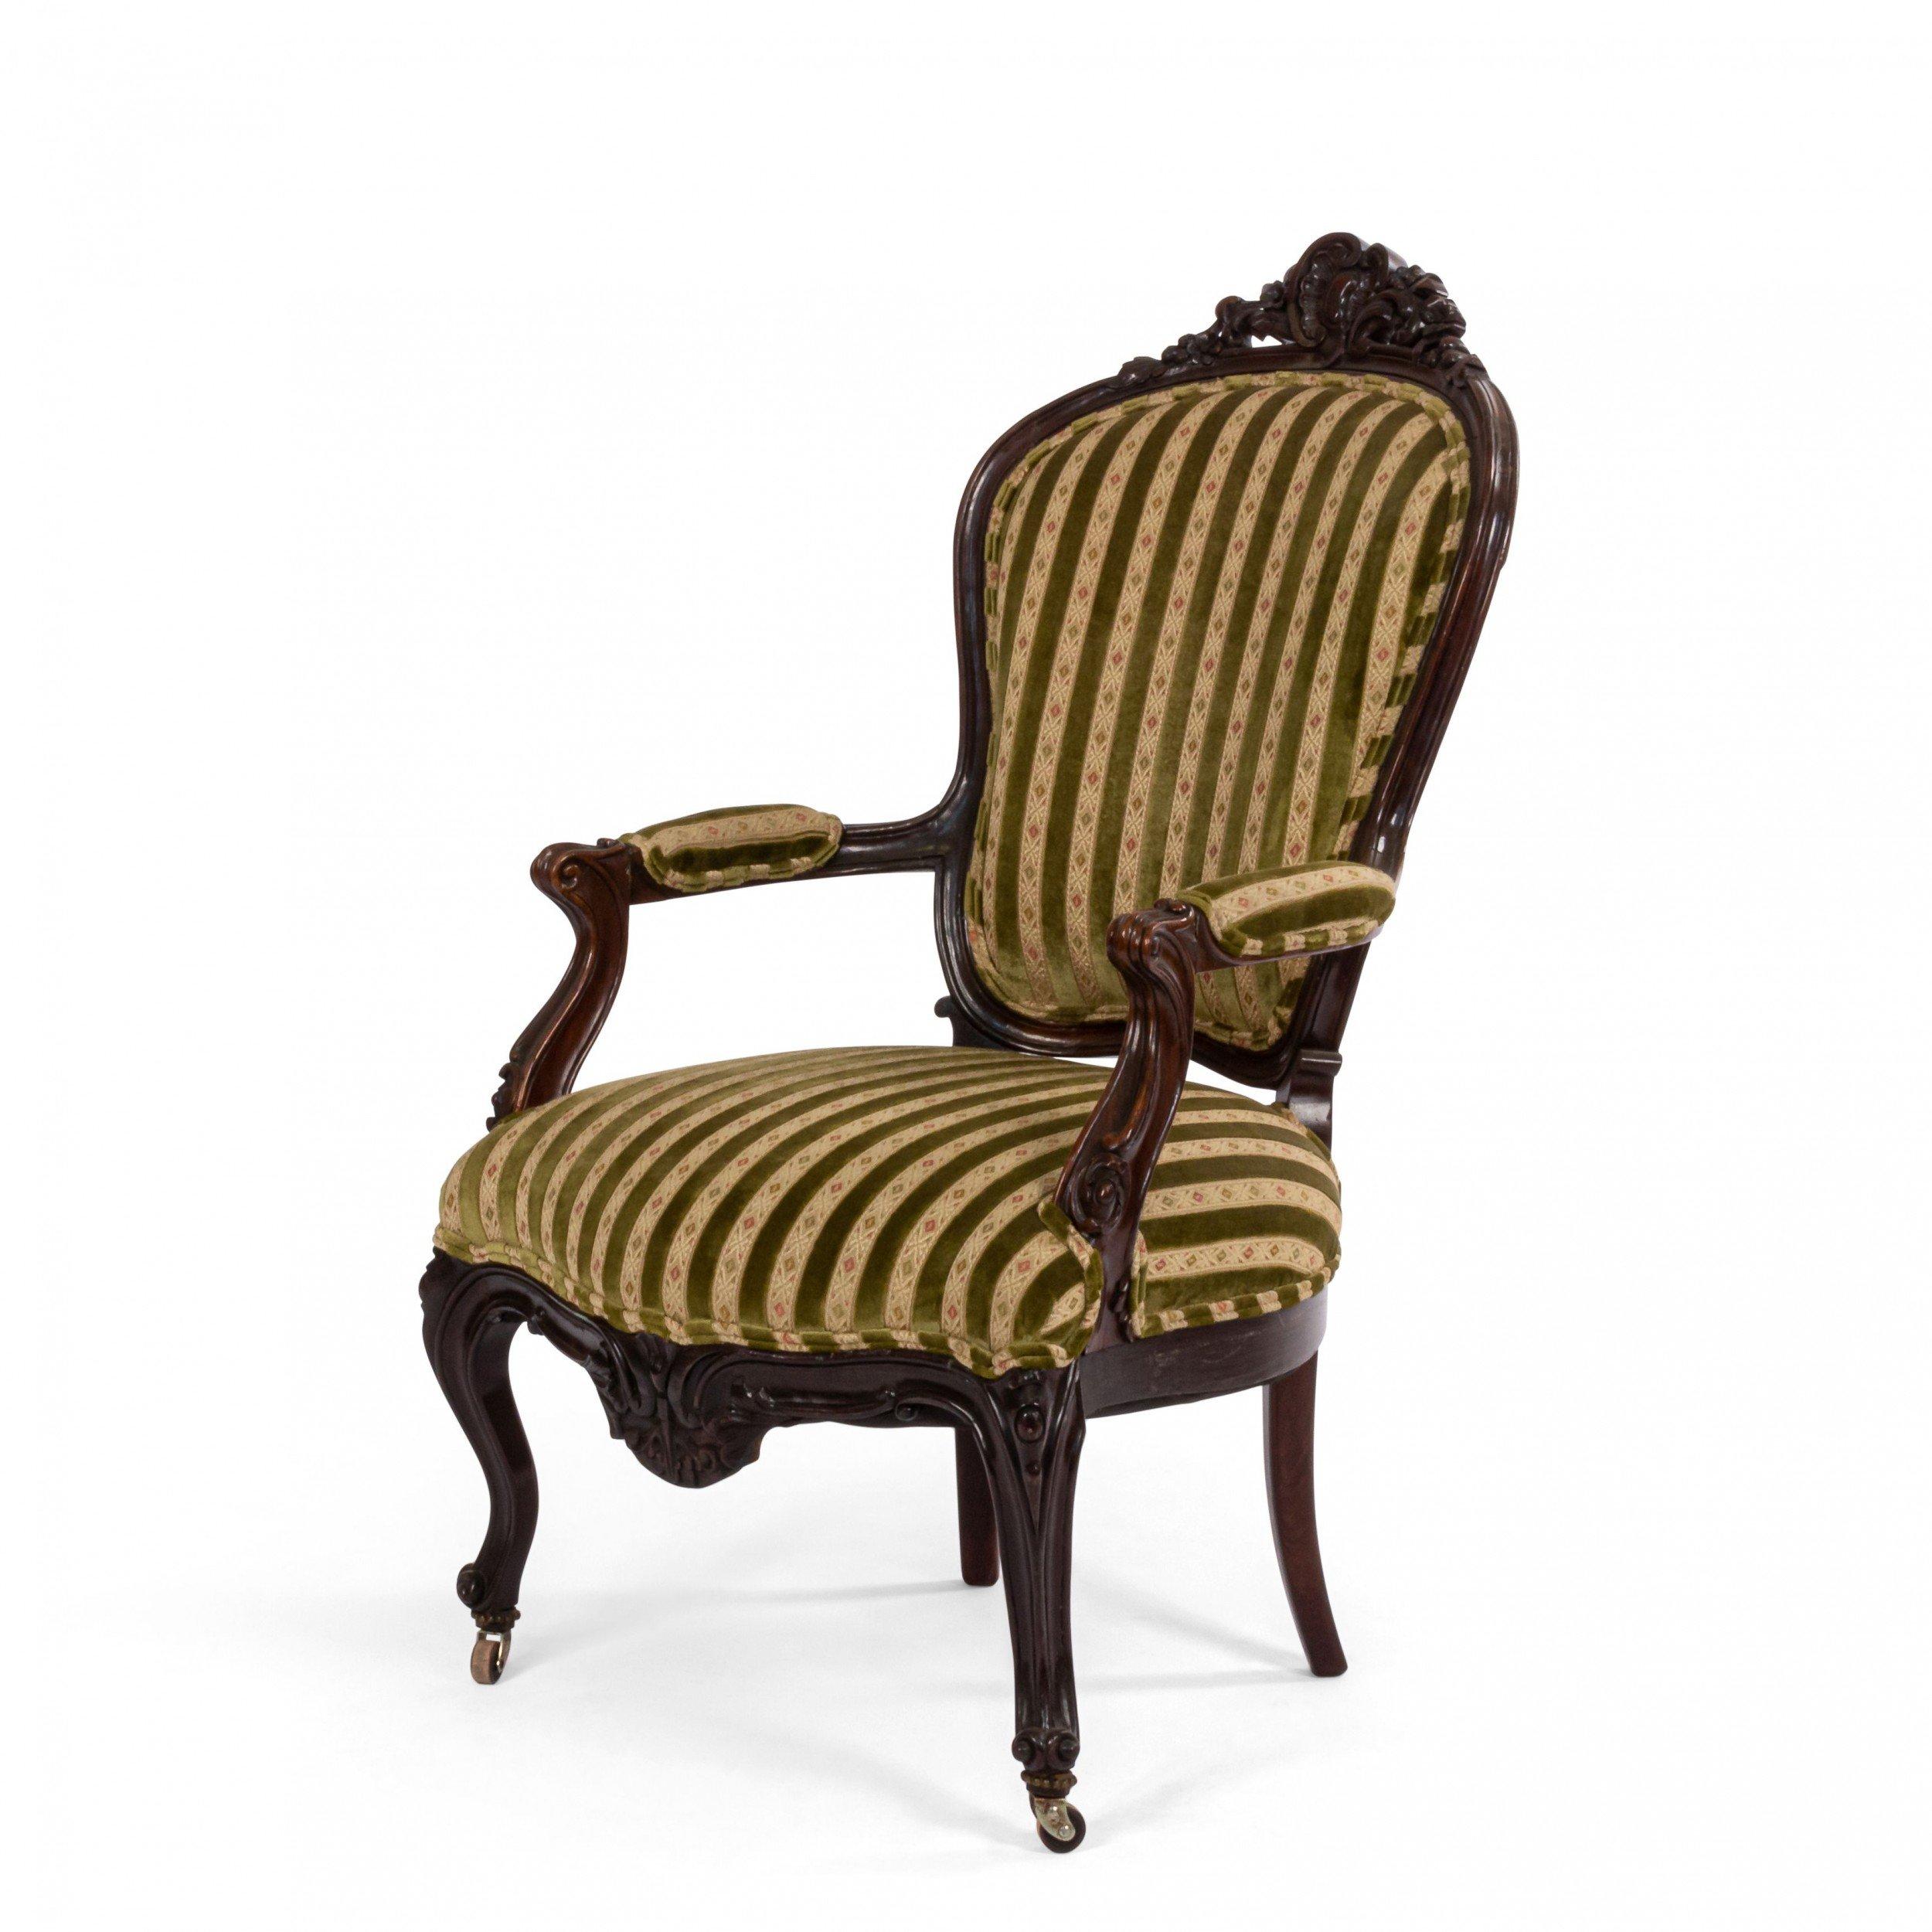 Pair of French Victorian rosewood armchairs with carved back crest rail and striped velvet upholstery